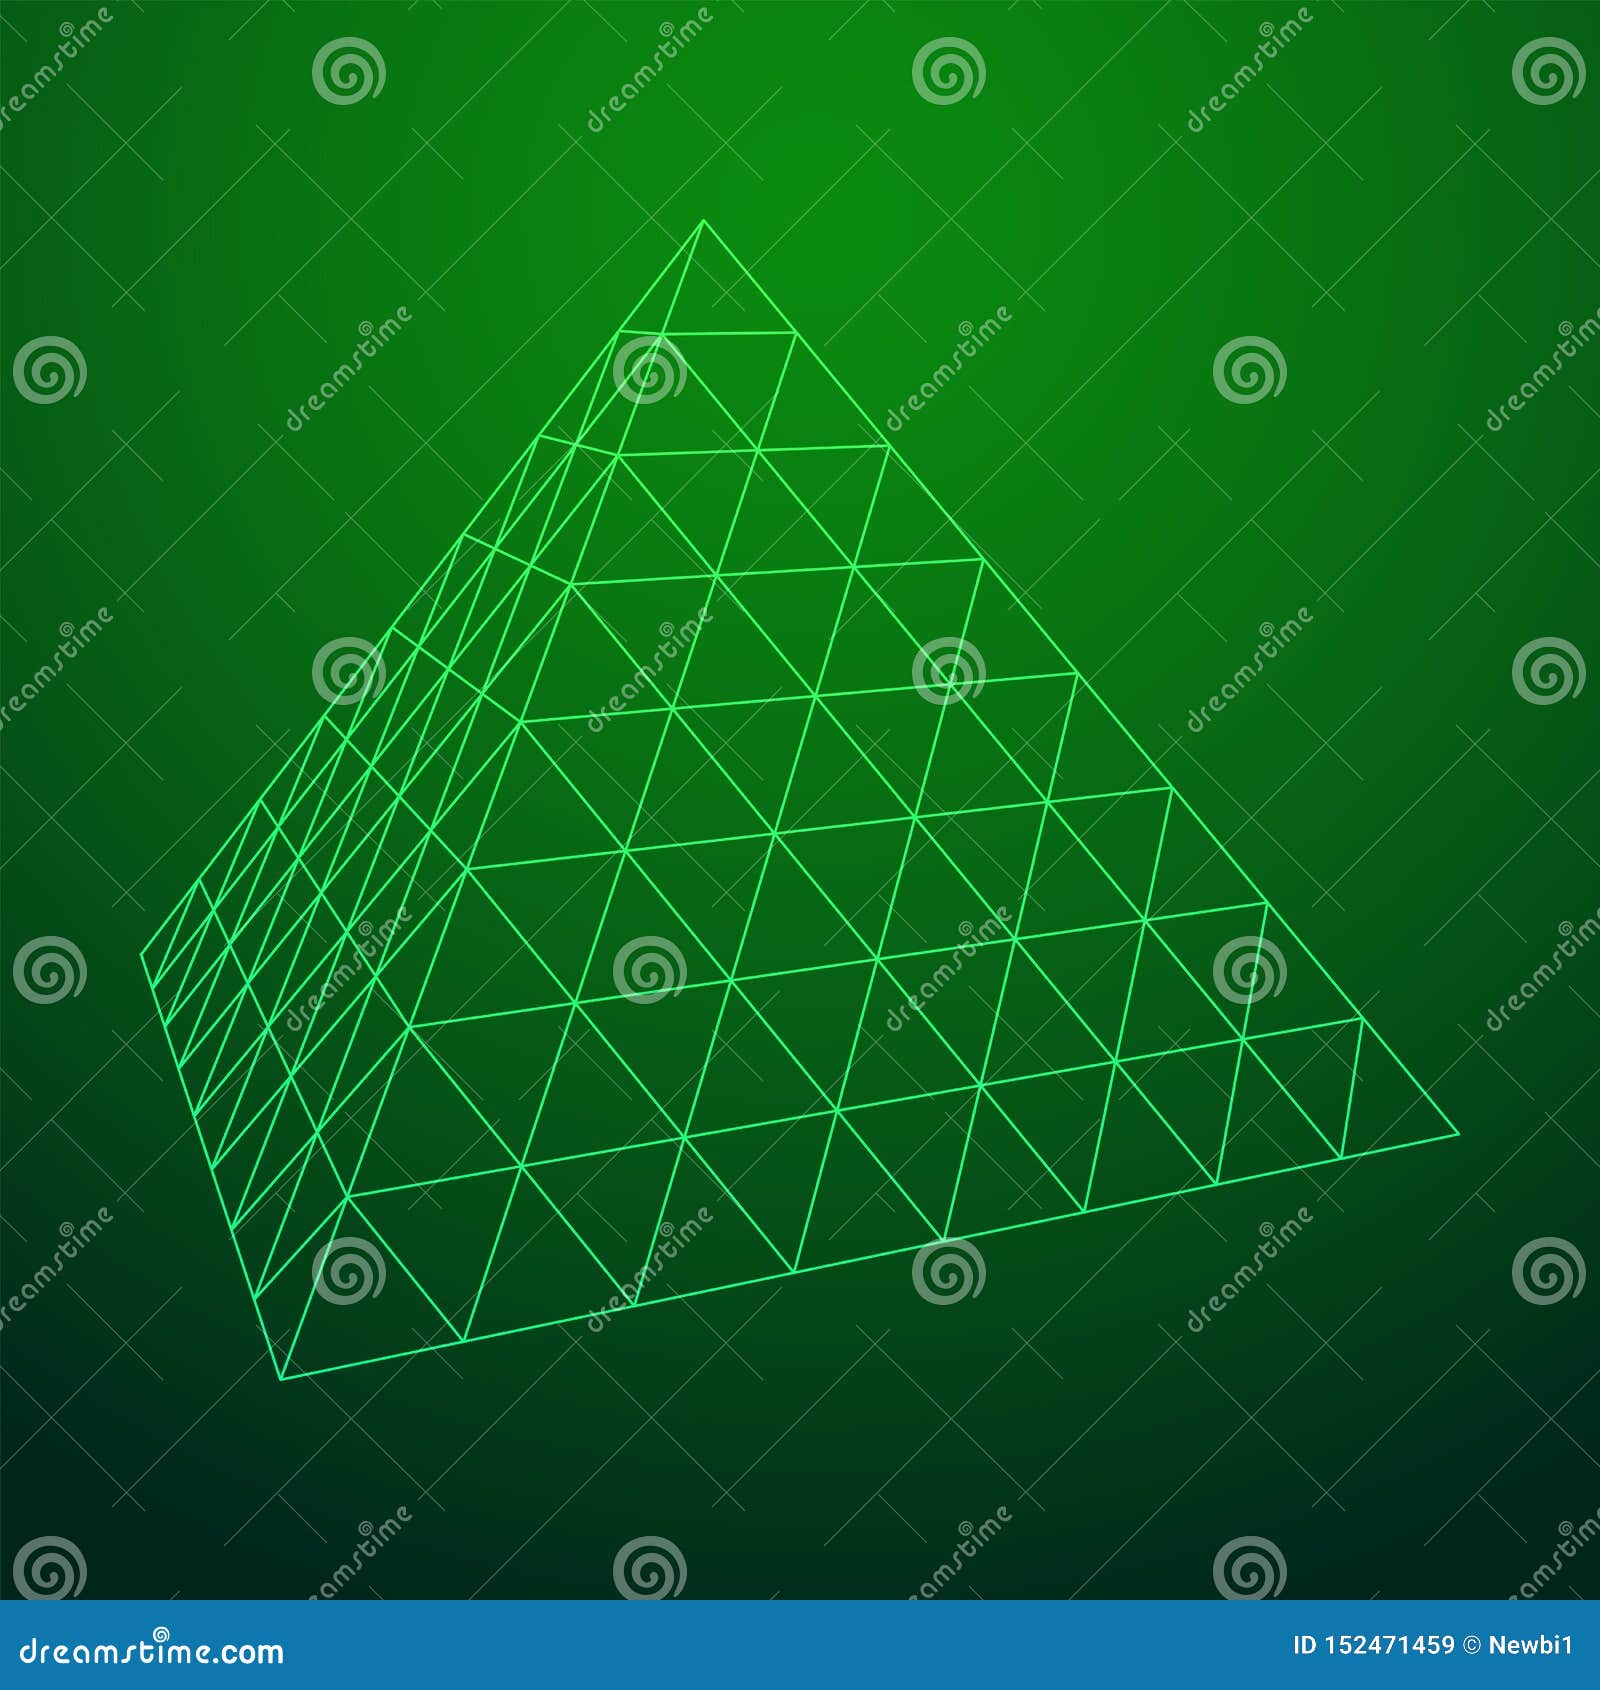 Pyramid Molecular Grid Wireframe Stock Vector - Illustration of connect ...